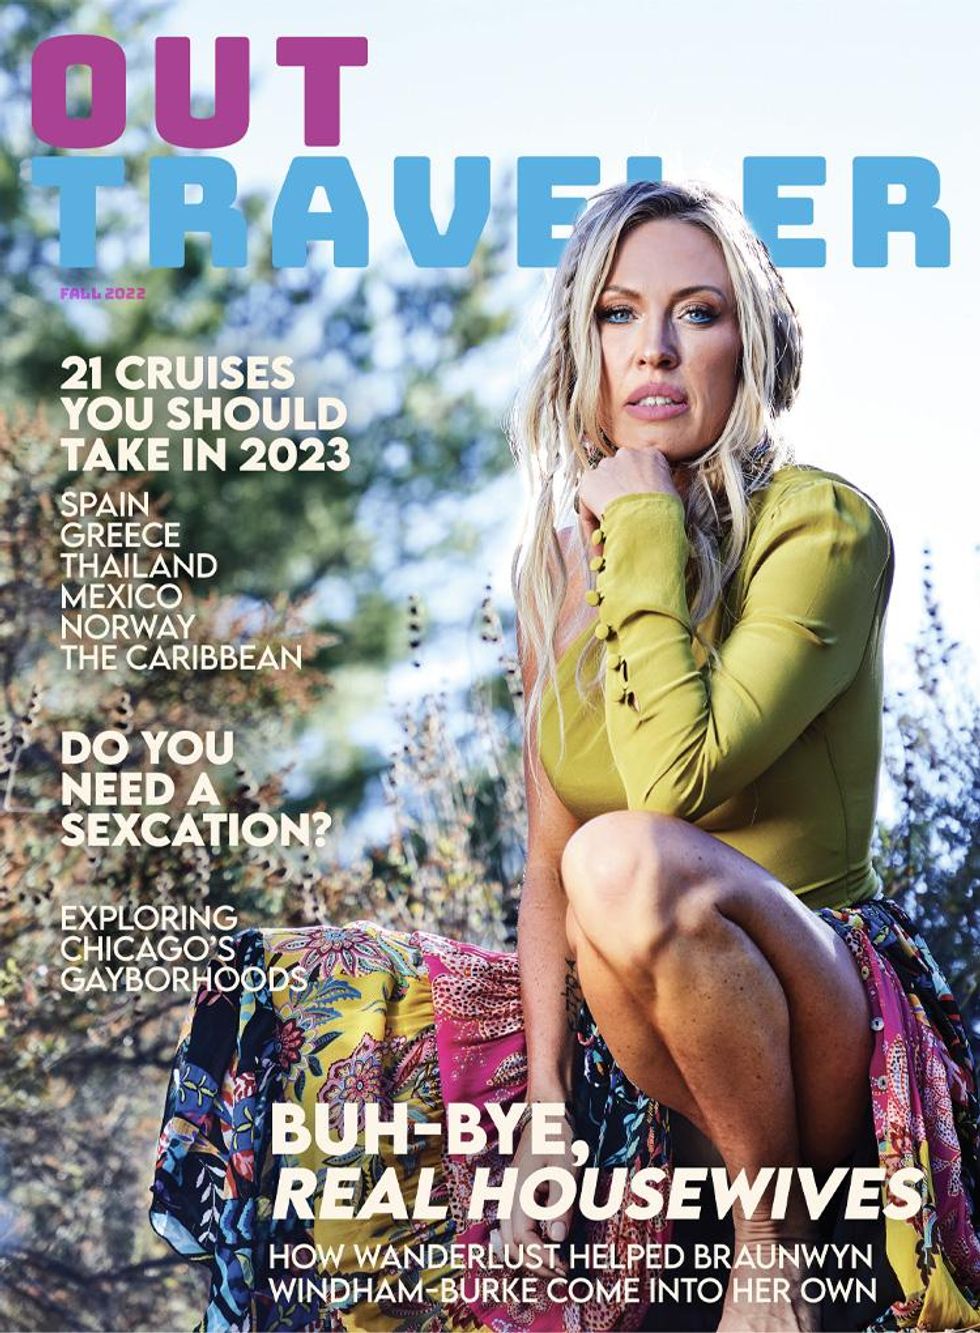 Real Housewives Braunwyn Windham-Burke on cover of Out Traveler  Fall 2022